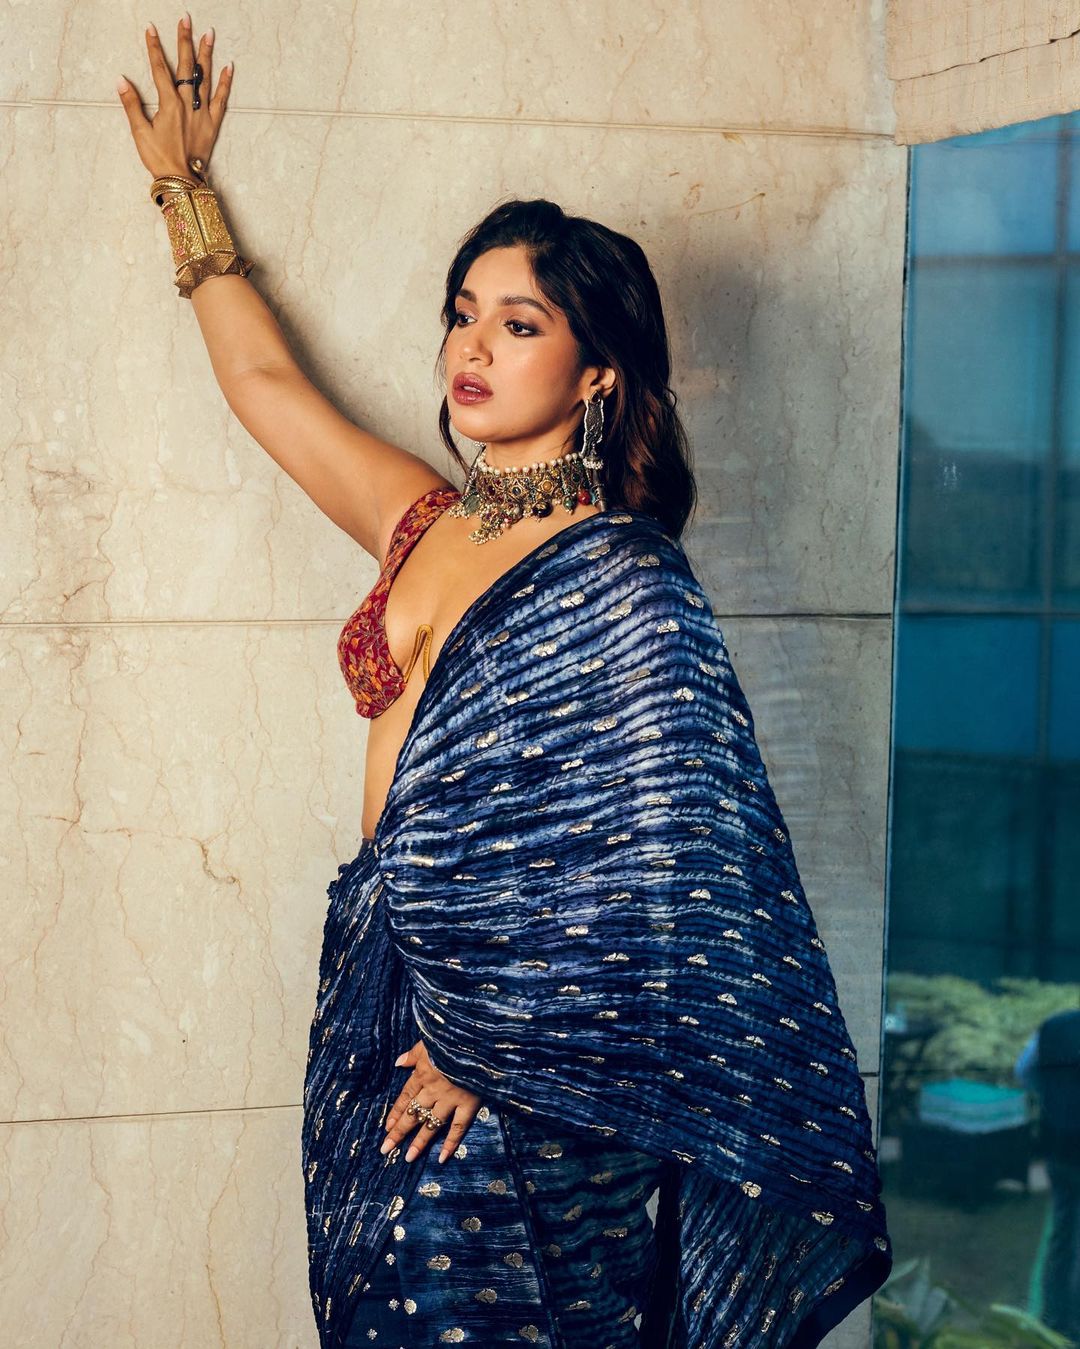 Bhumi Pednekar dazzles in a jaw-dropping bralette blouse and a statement saree at a friend's wedding.